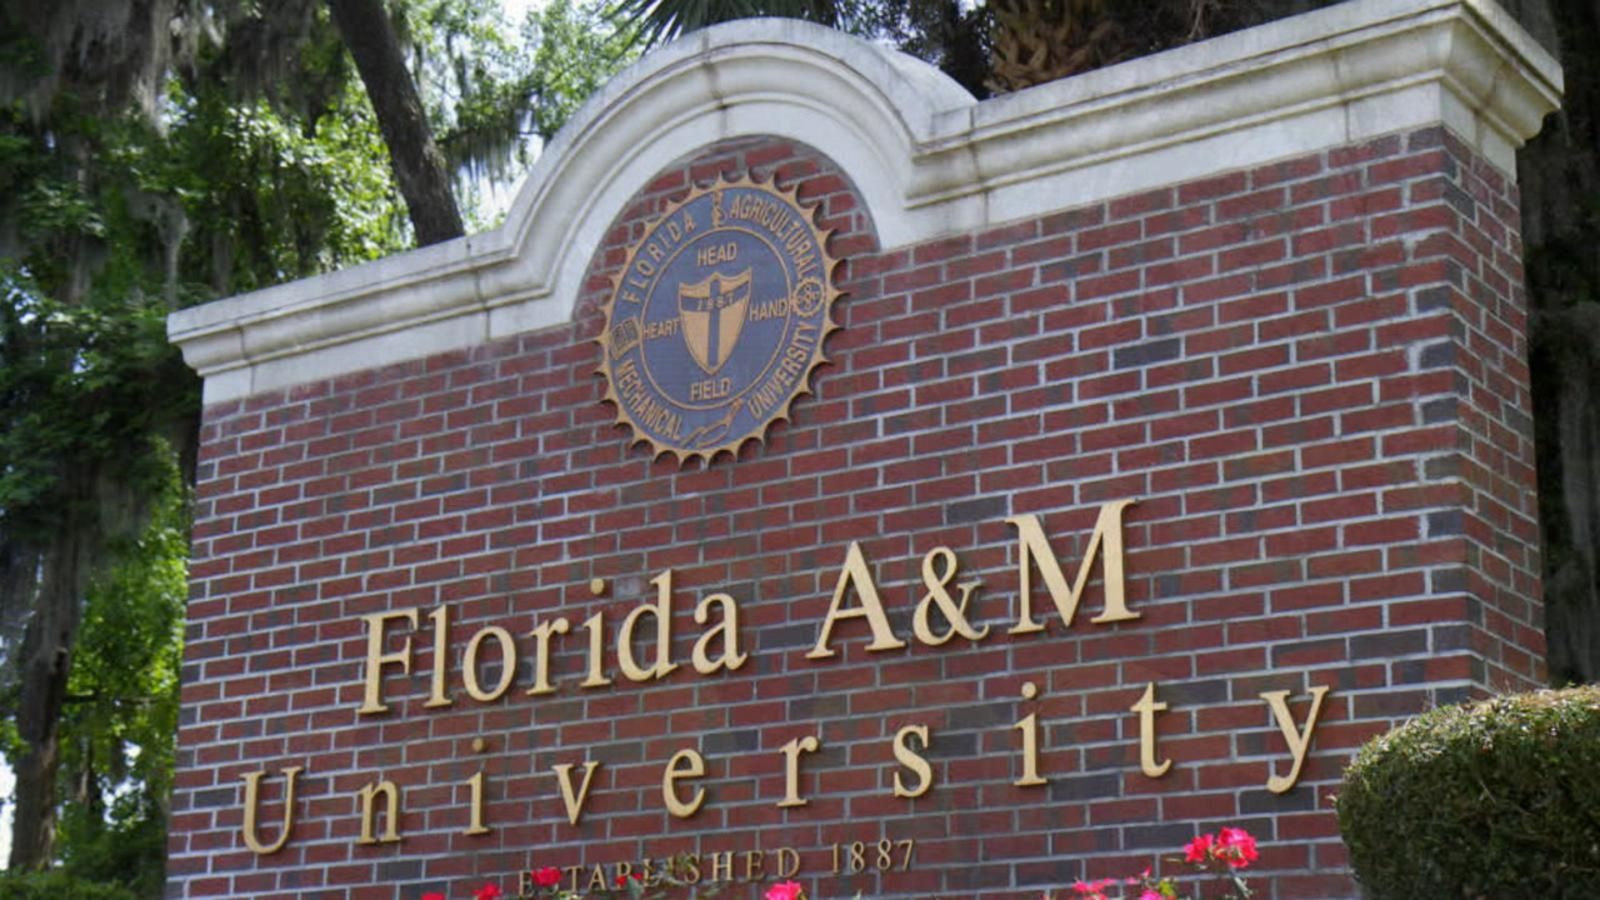 VIDEO: Florida A&M University pays $16M in student debt